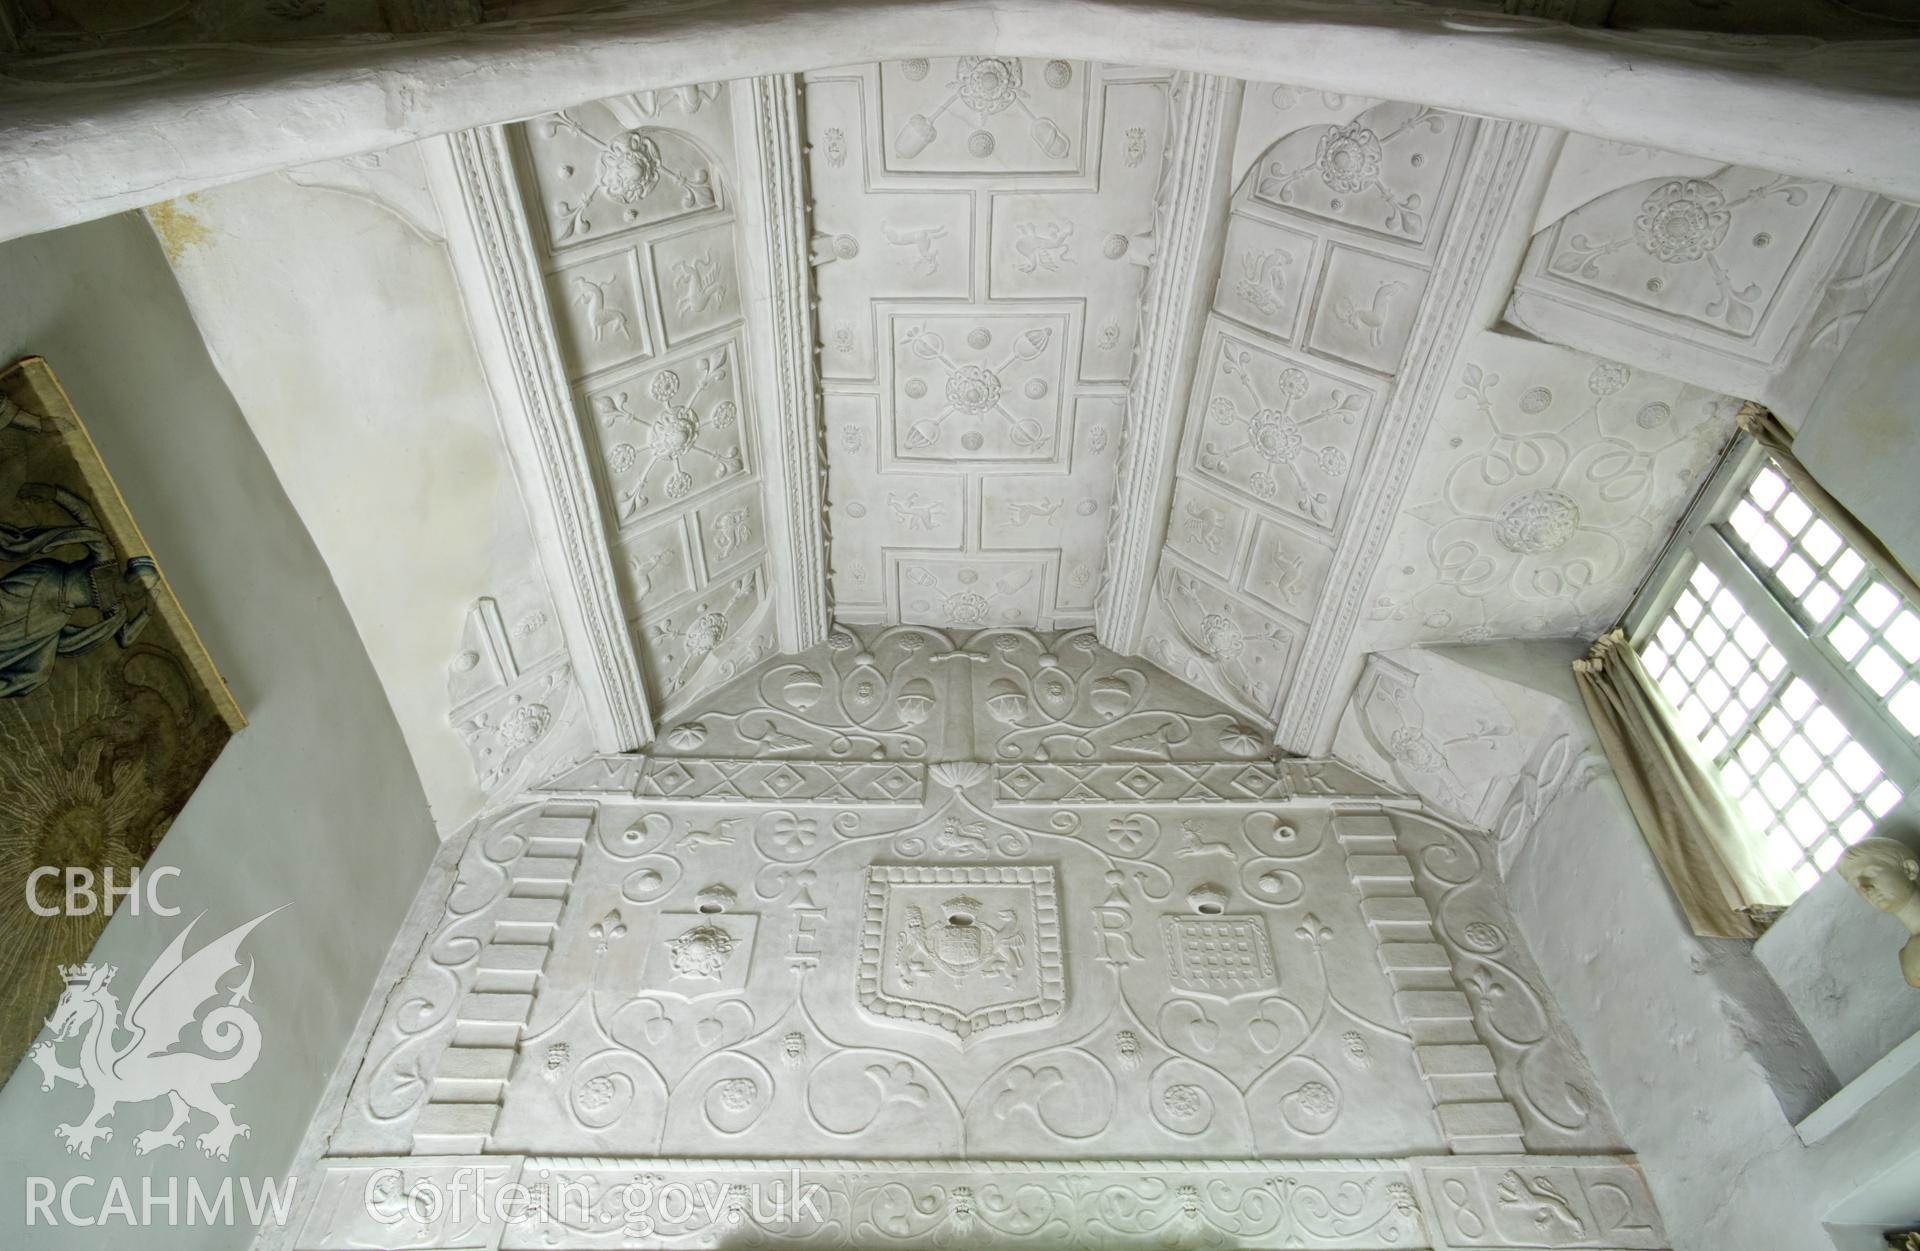 Detail of plasterwork on northwest wall and ceiling.